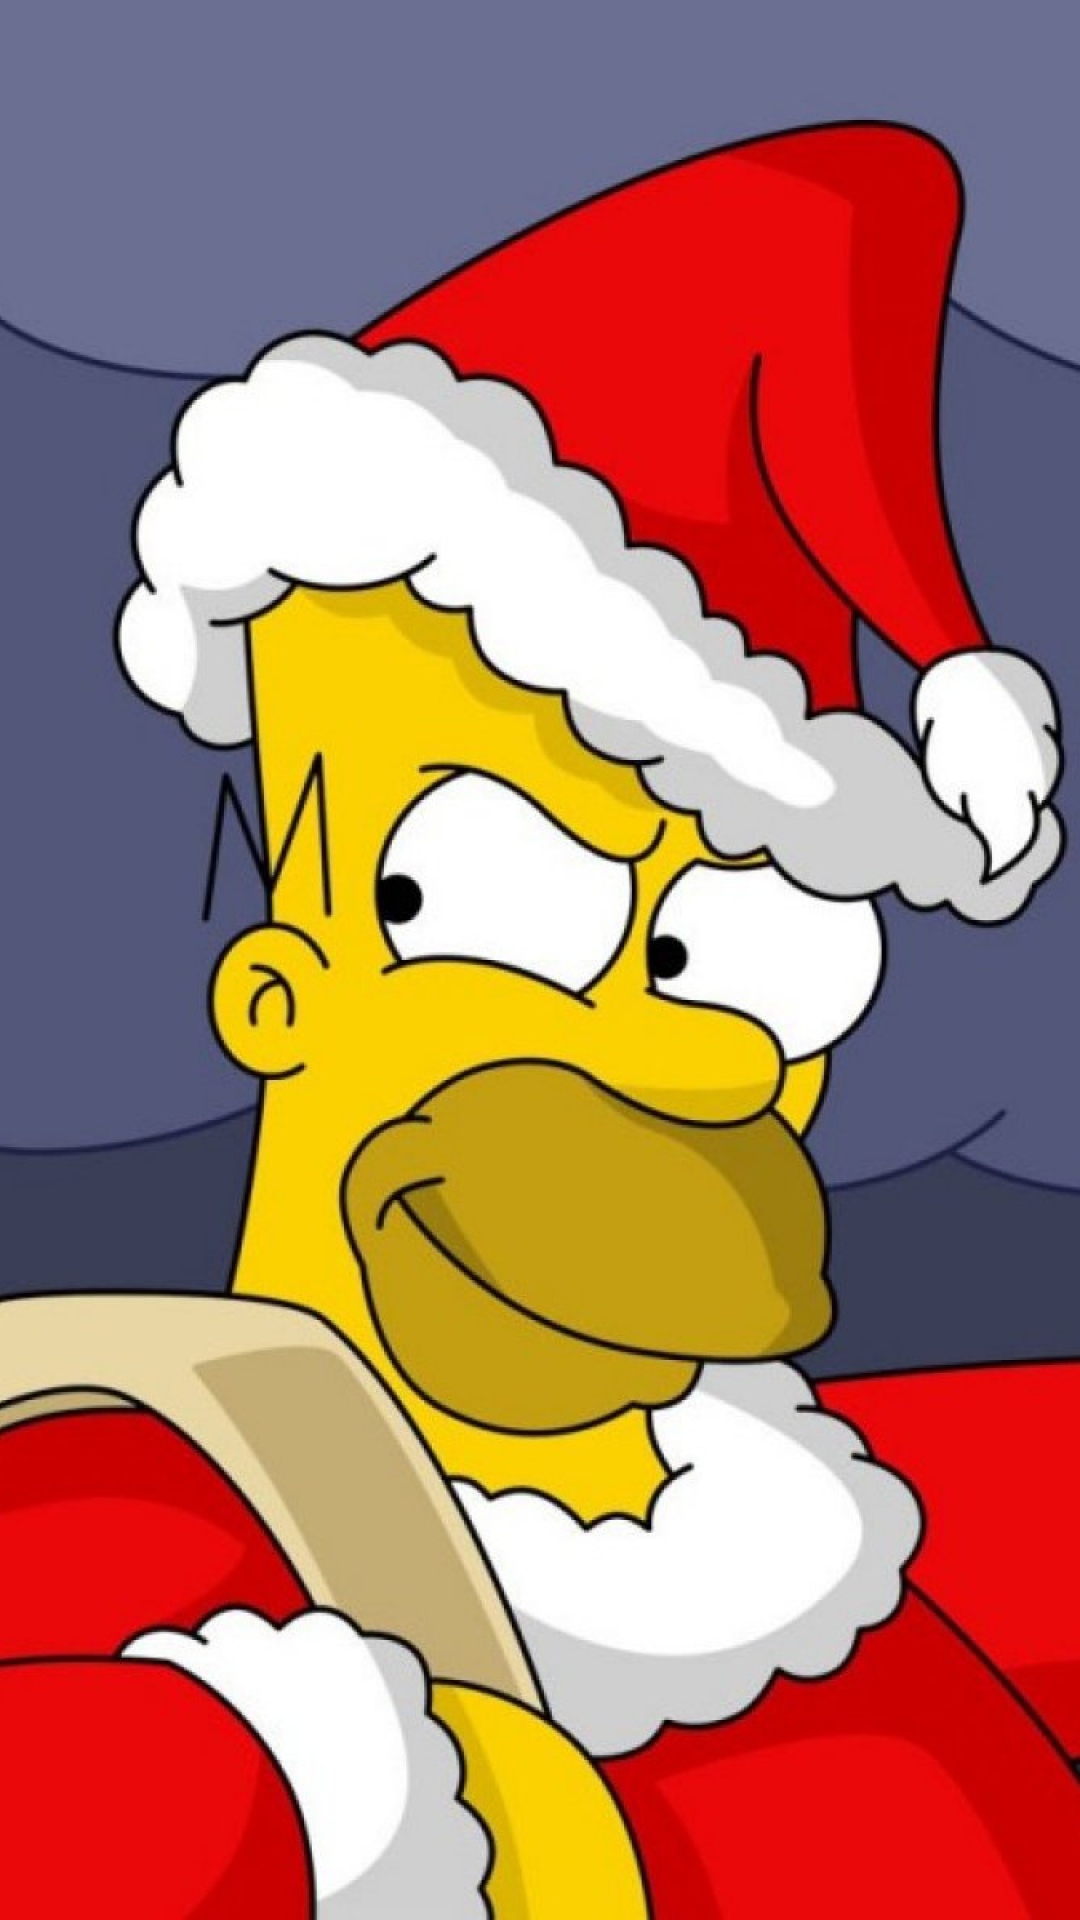 Christmas Wrapping For The Iphone 6 Plus And Apple - Simpsons Christmas Wallpaper Iphone - HD Wallpaper 